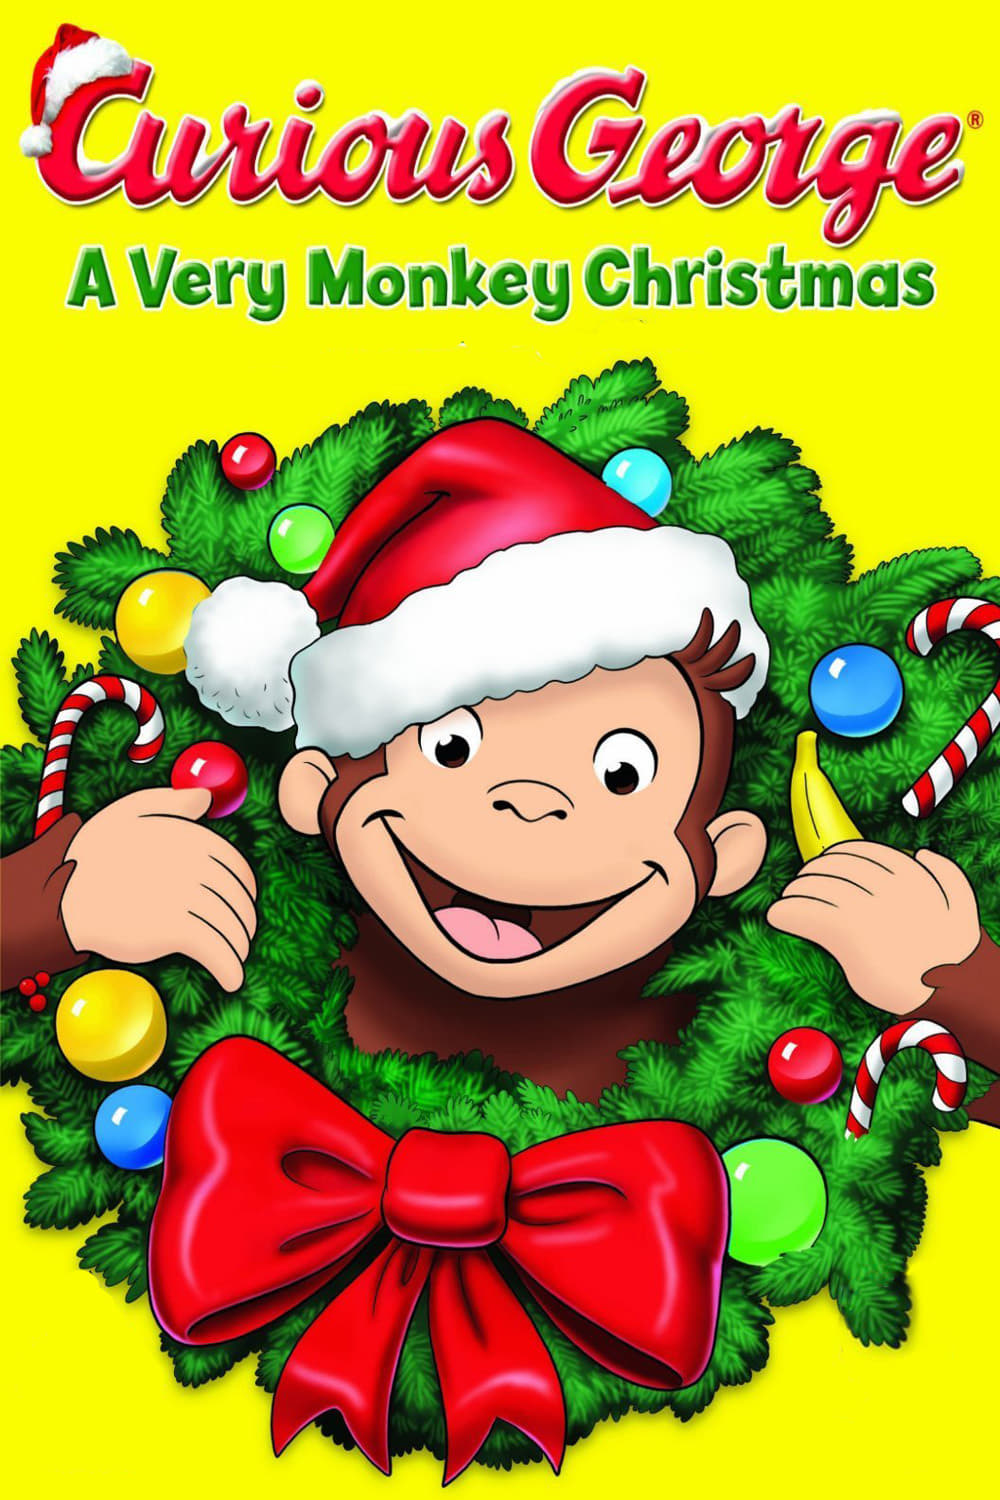 Poster for the movie "Curious George: A Very Monkey Christmas"